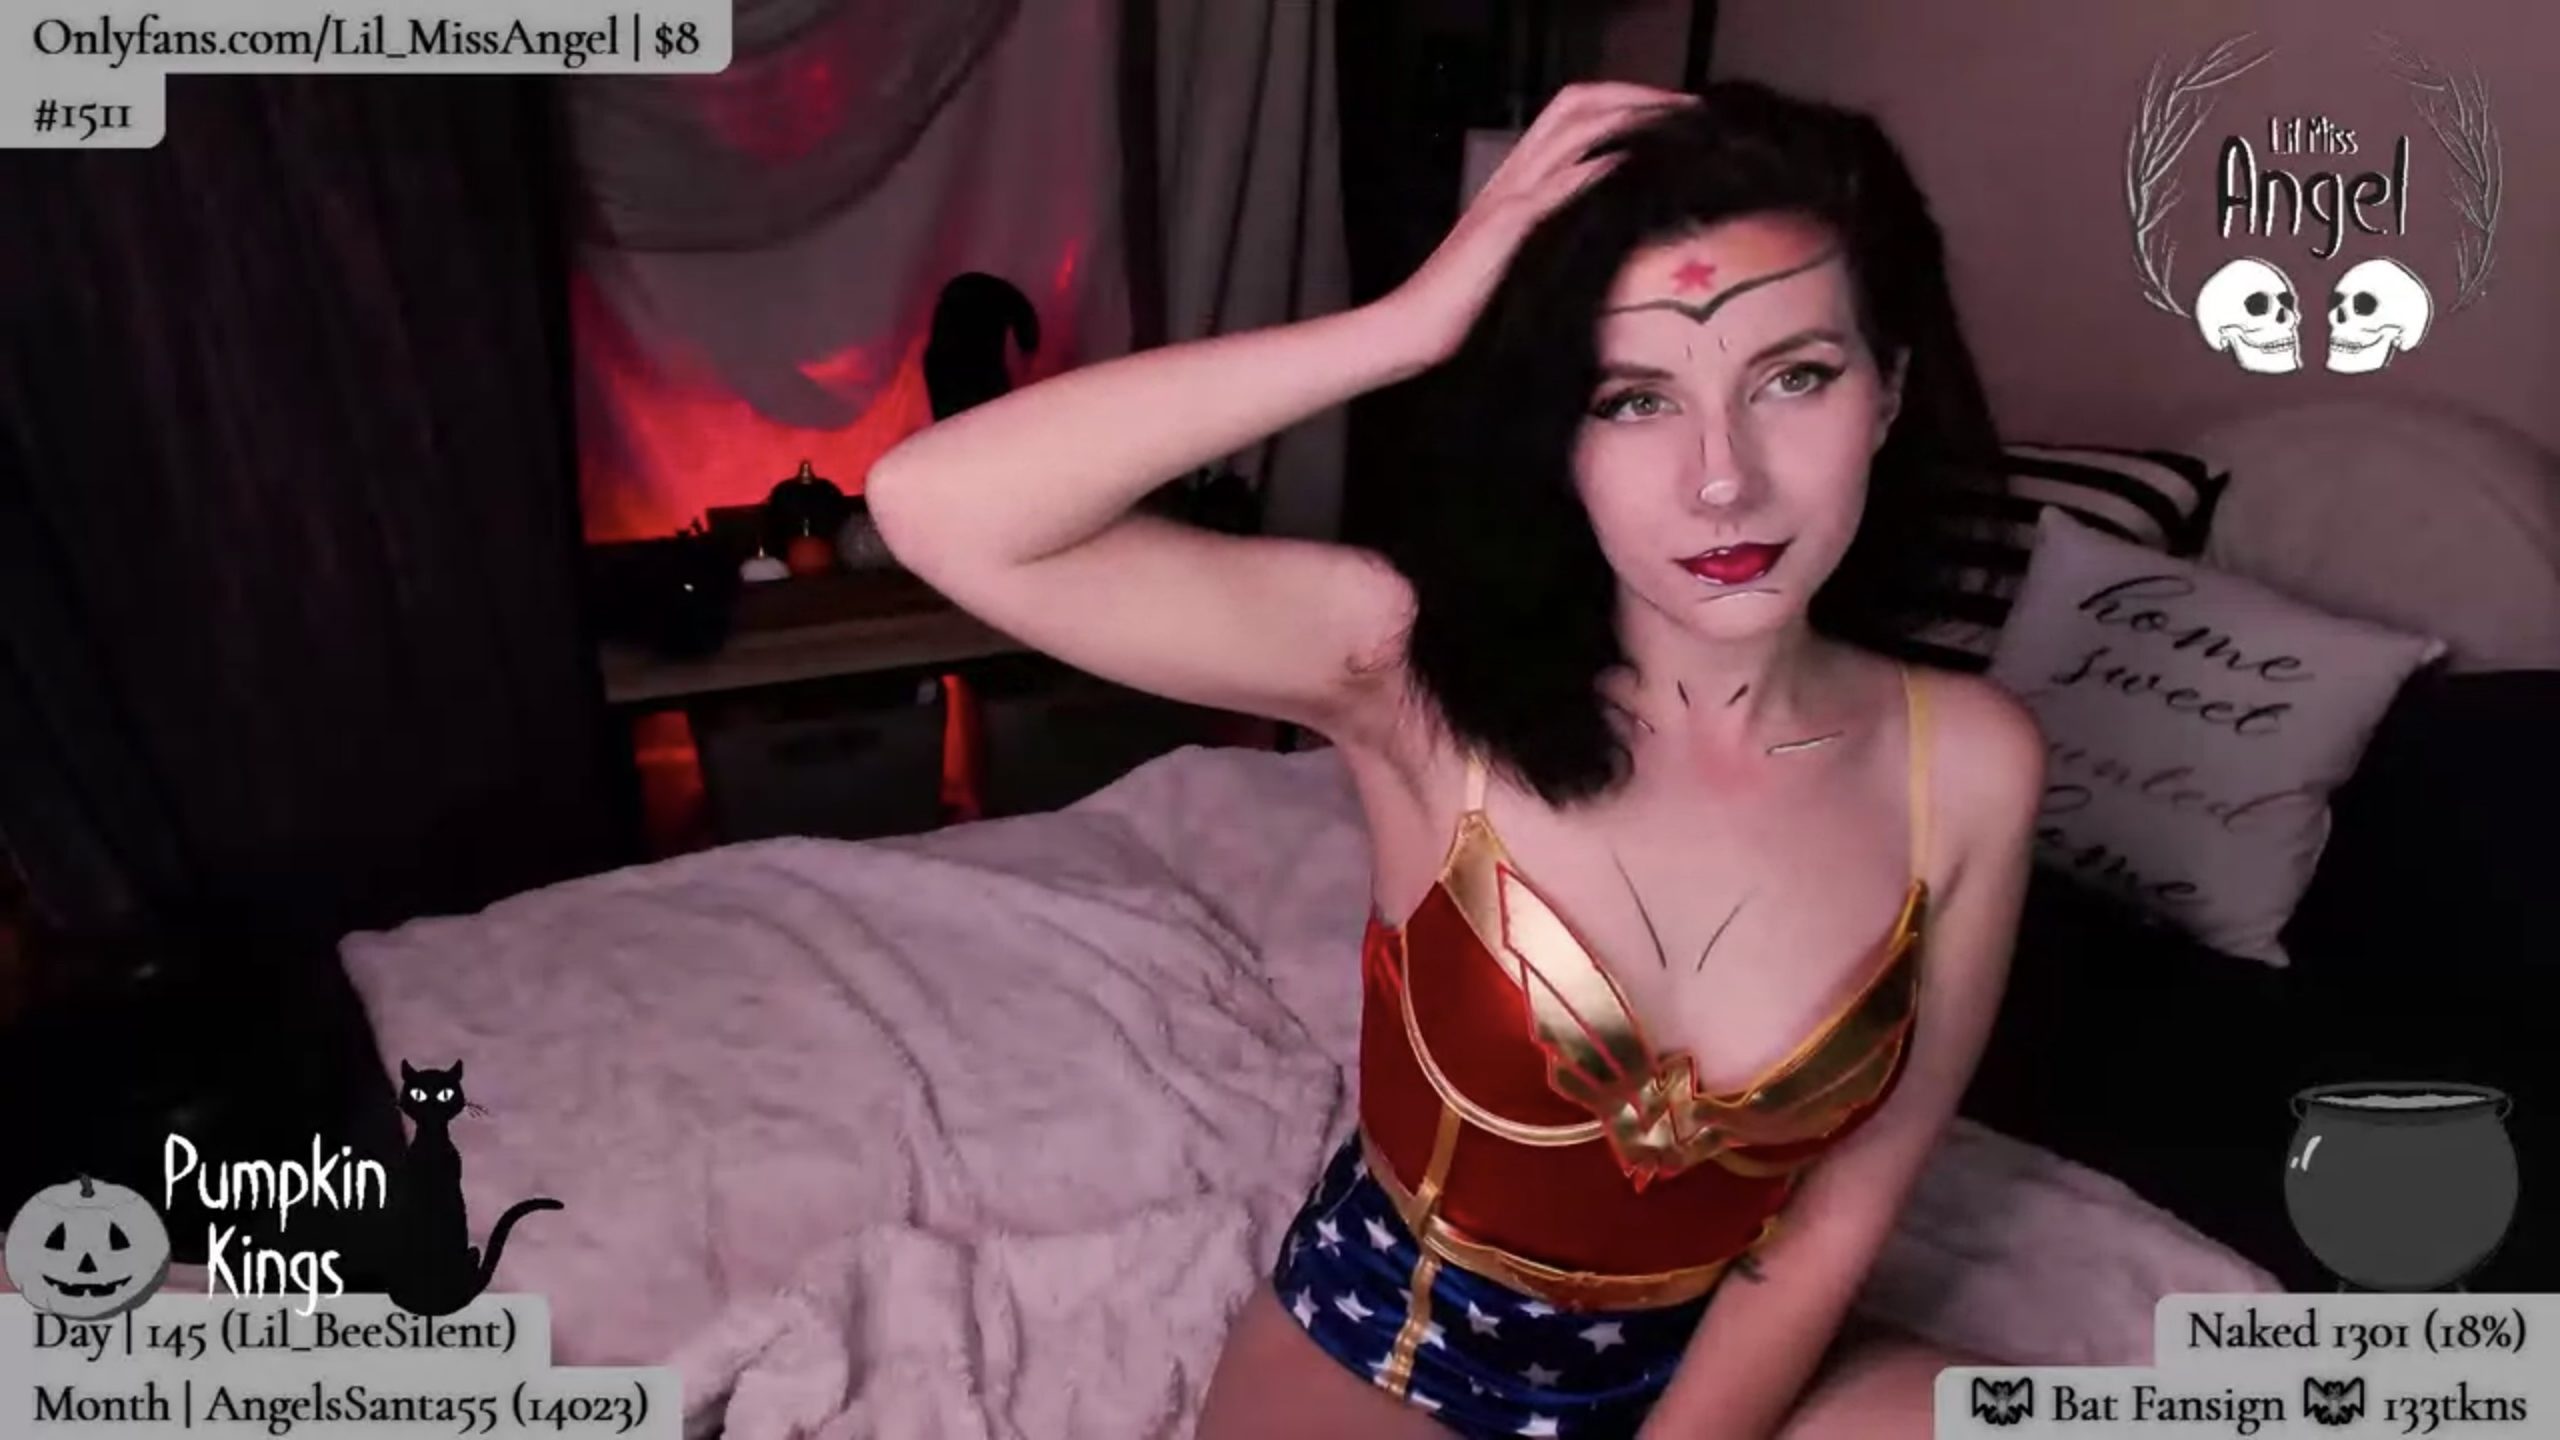 Lil_MissAngel Takes Her Lasso And Gets Ready To Fight